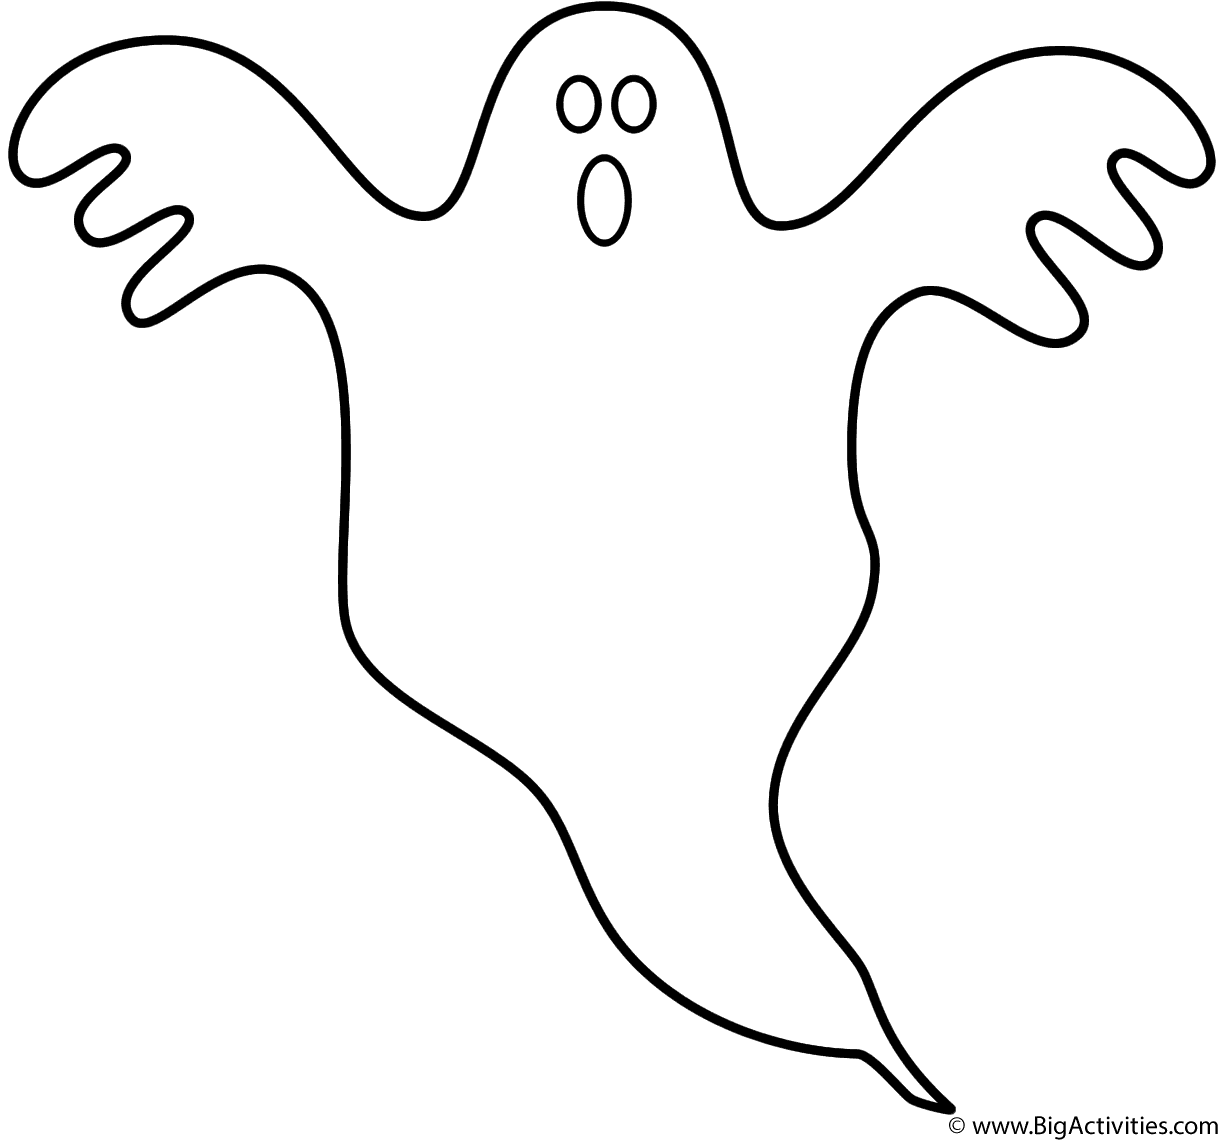 Ghost - Coloring Page (Halloween)